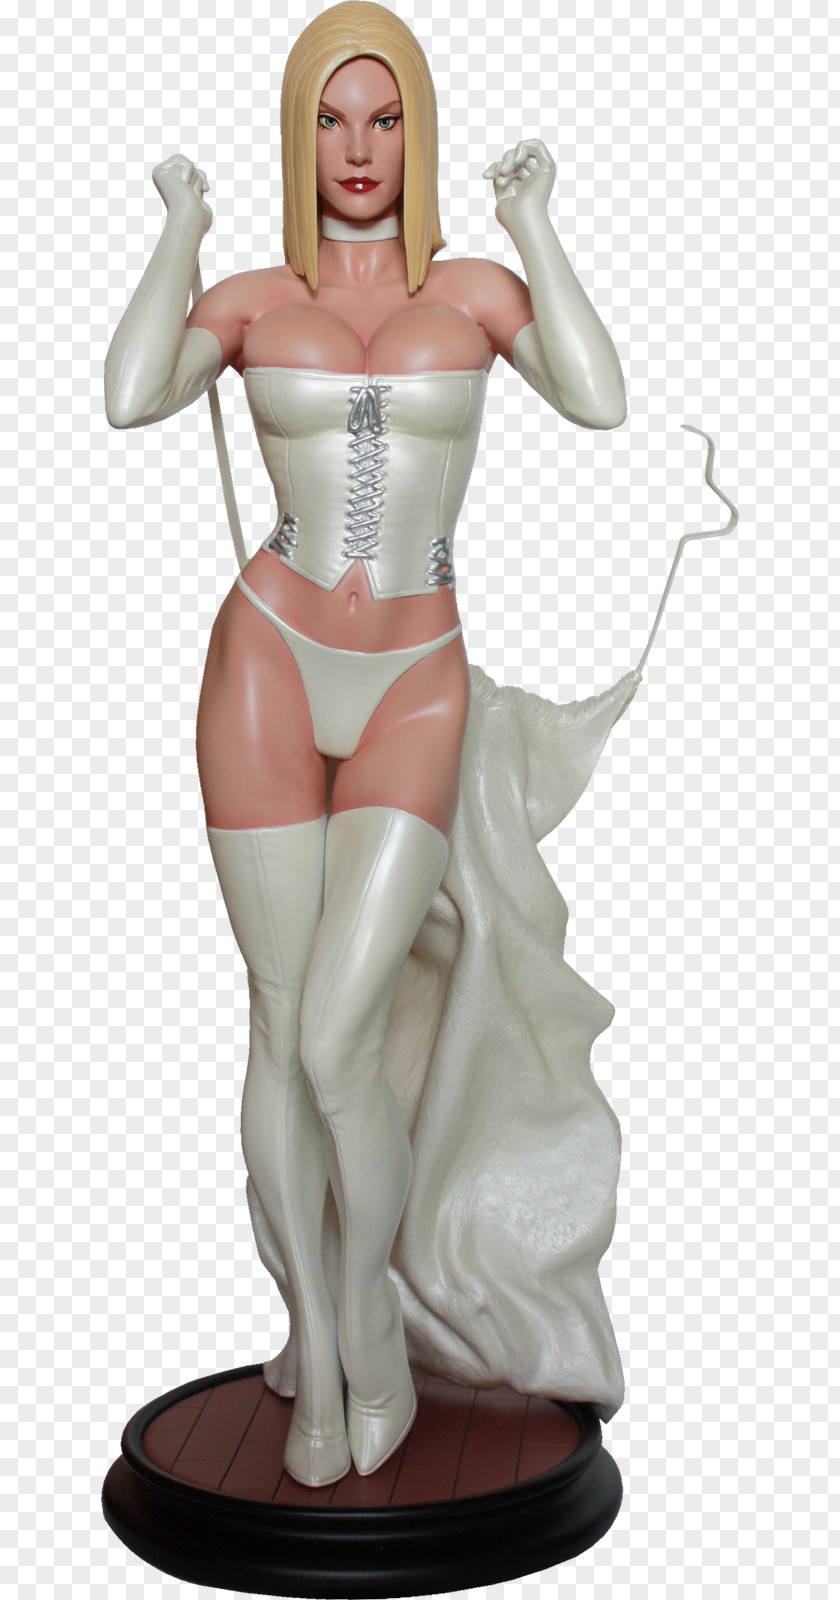 Emma Frost Statue Figurine Sideshow Collectibles Hellfire Club PNG